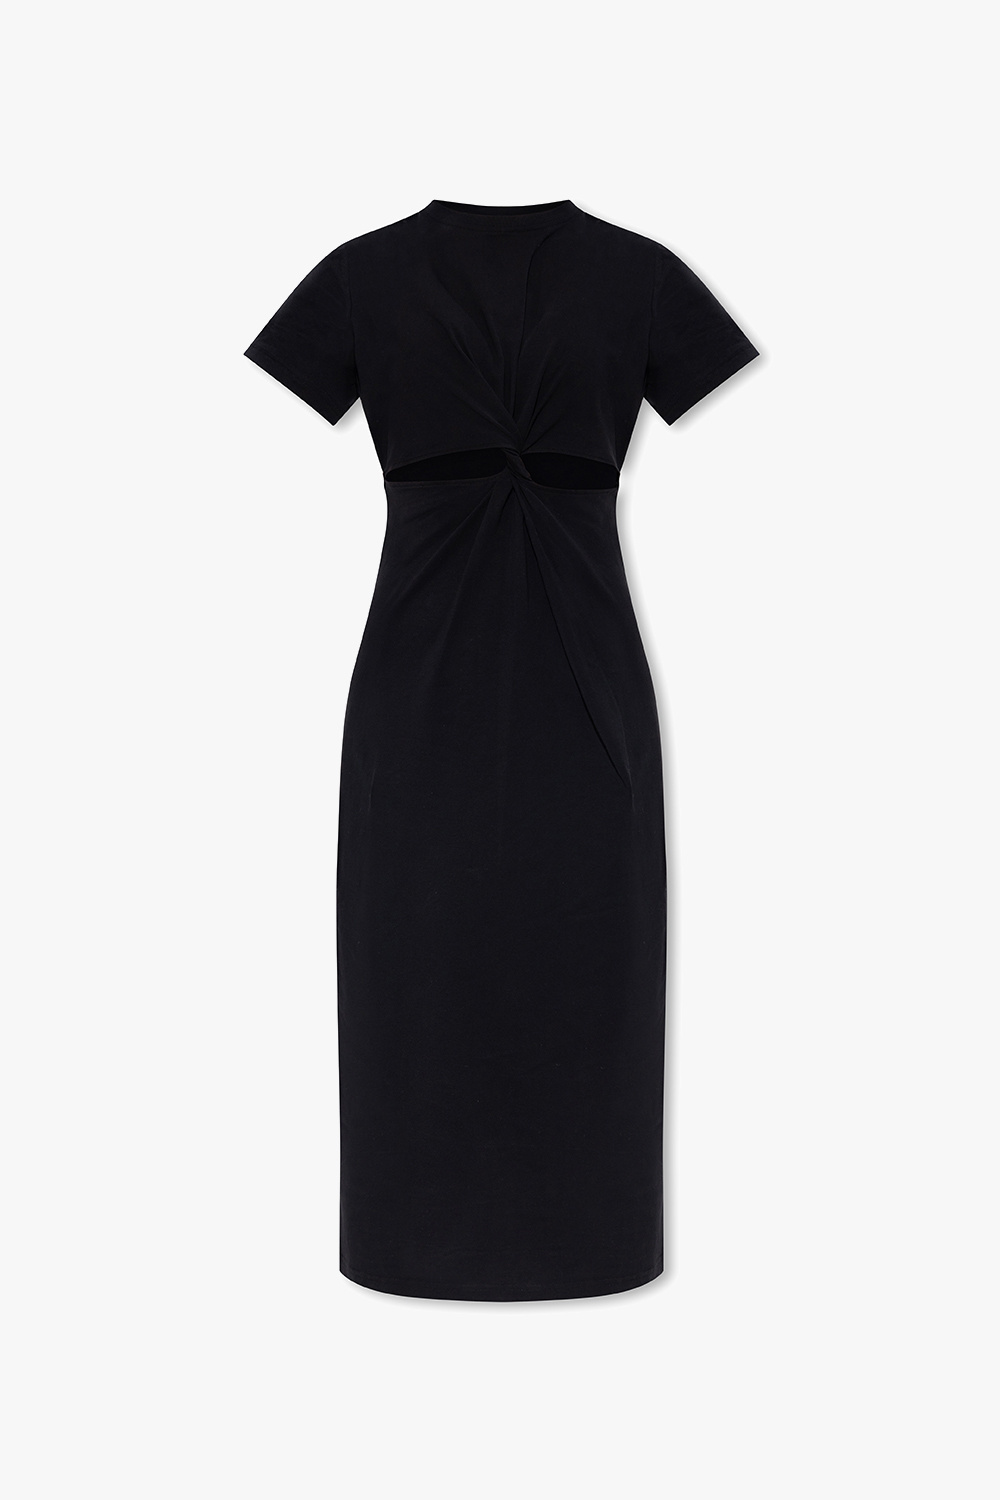 HERSKIND ‘Zach’ dress with cut-outs